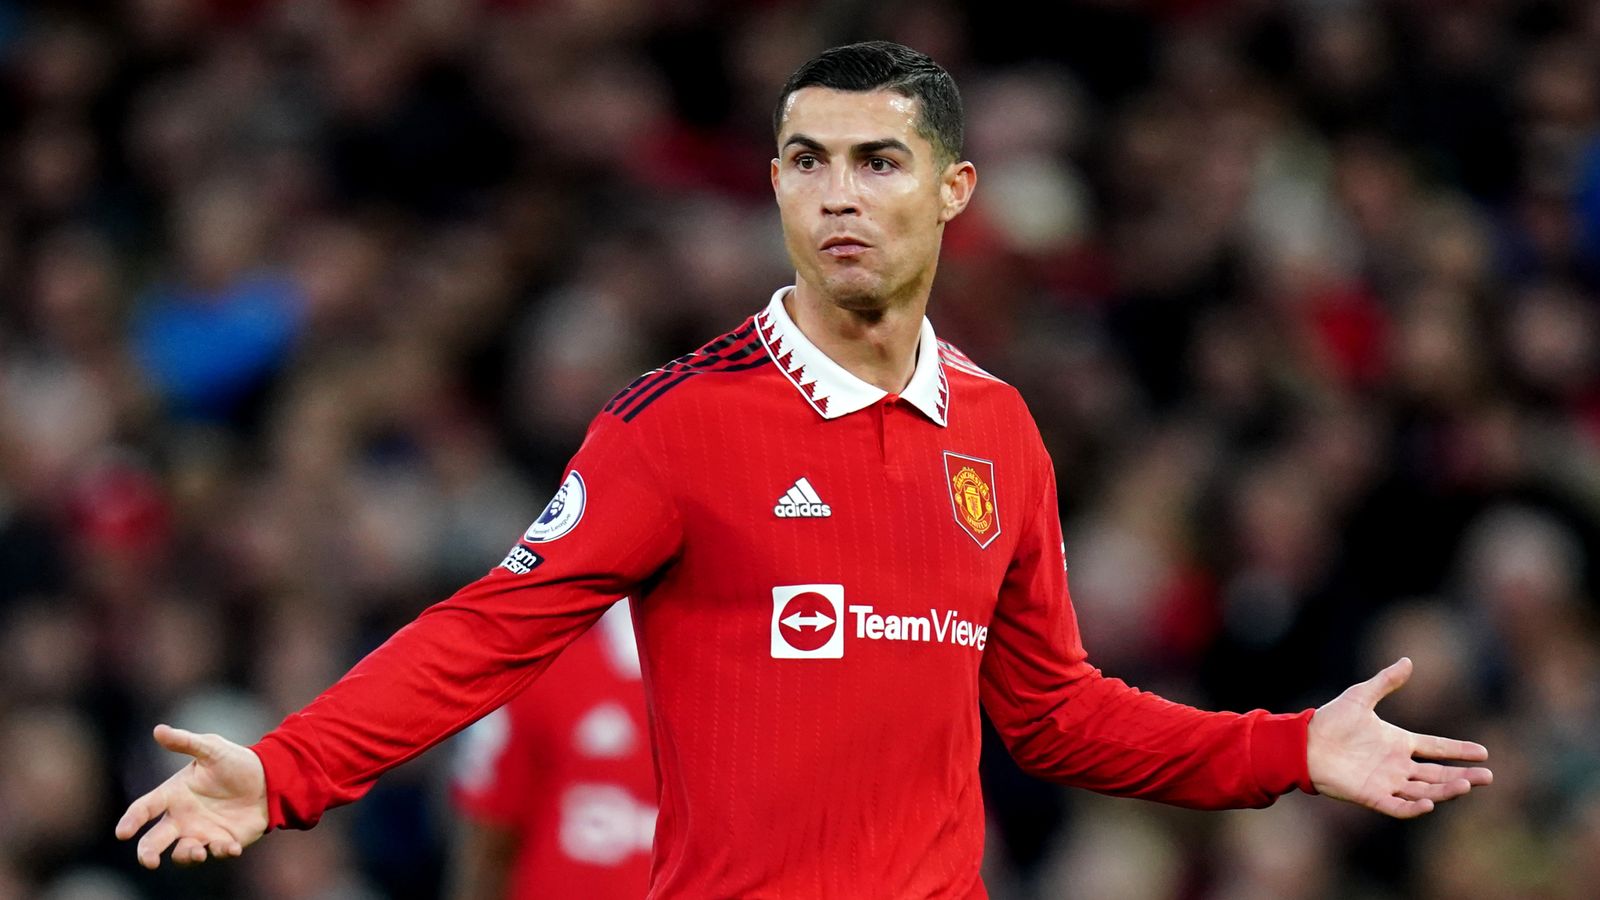 Cristiano Ronaldo leaves Manchester United with immediate effect